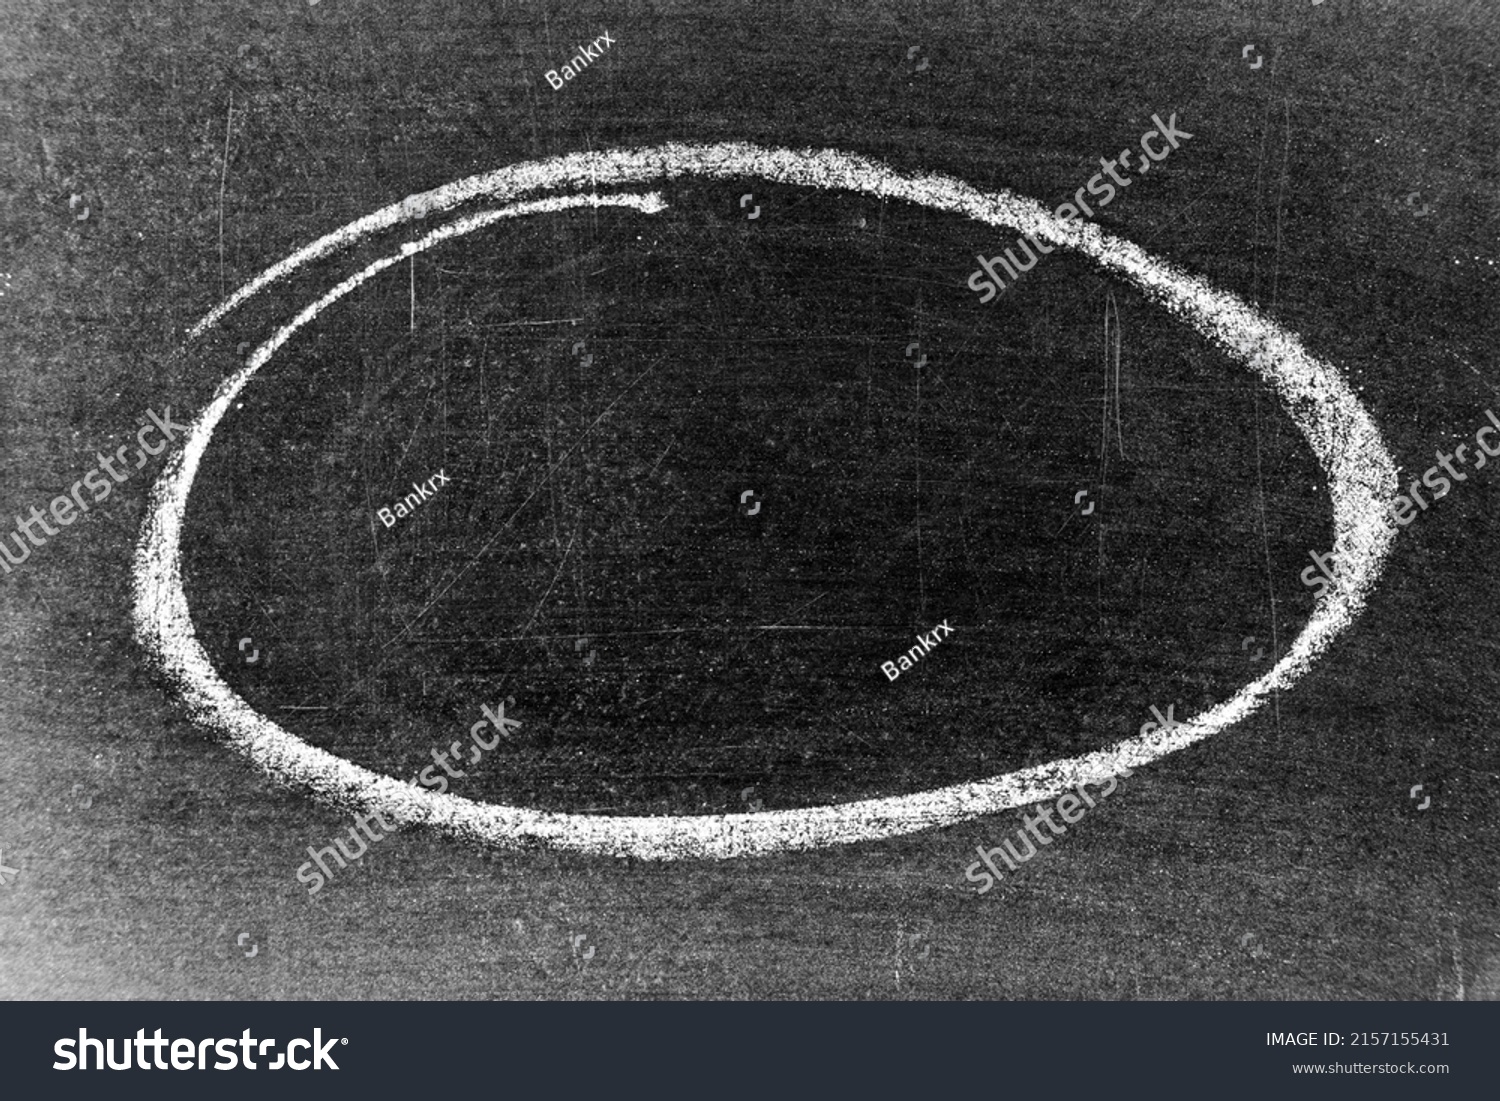 White chalk hand drawing as circle or round shape on blackboard or chalkboard background with copy space #2157155431